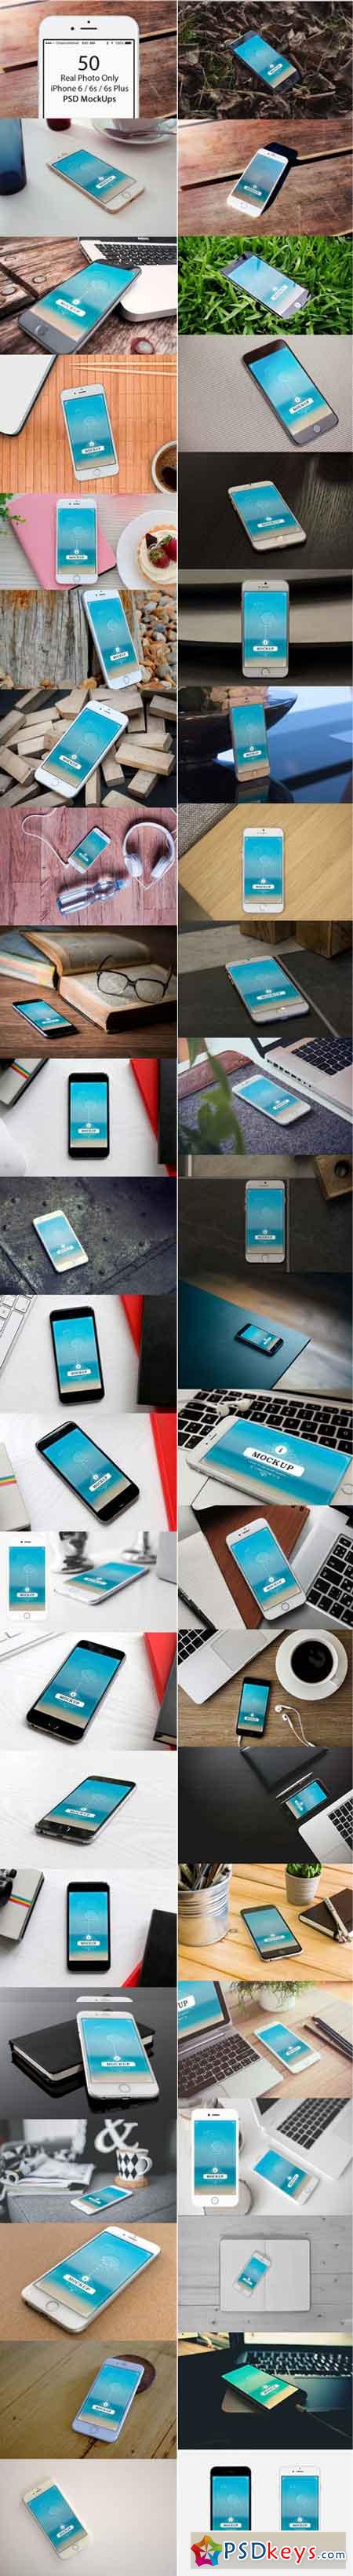 50 Only iPhone 6 6s 6s Plus Mockups 830522